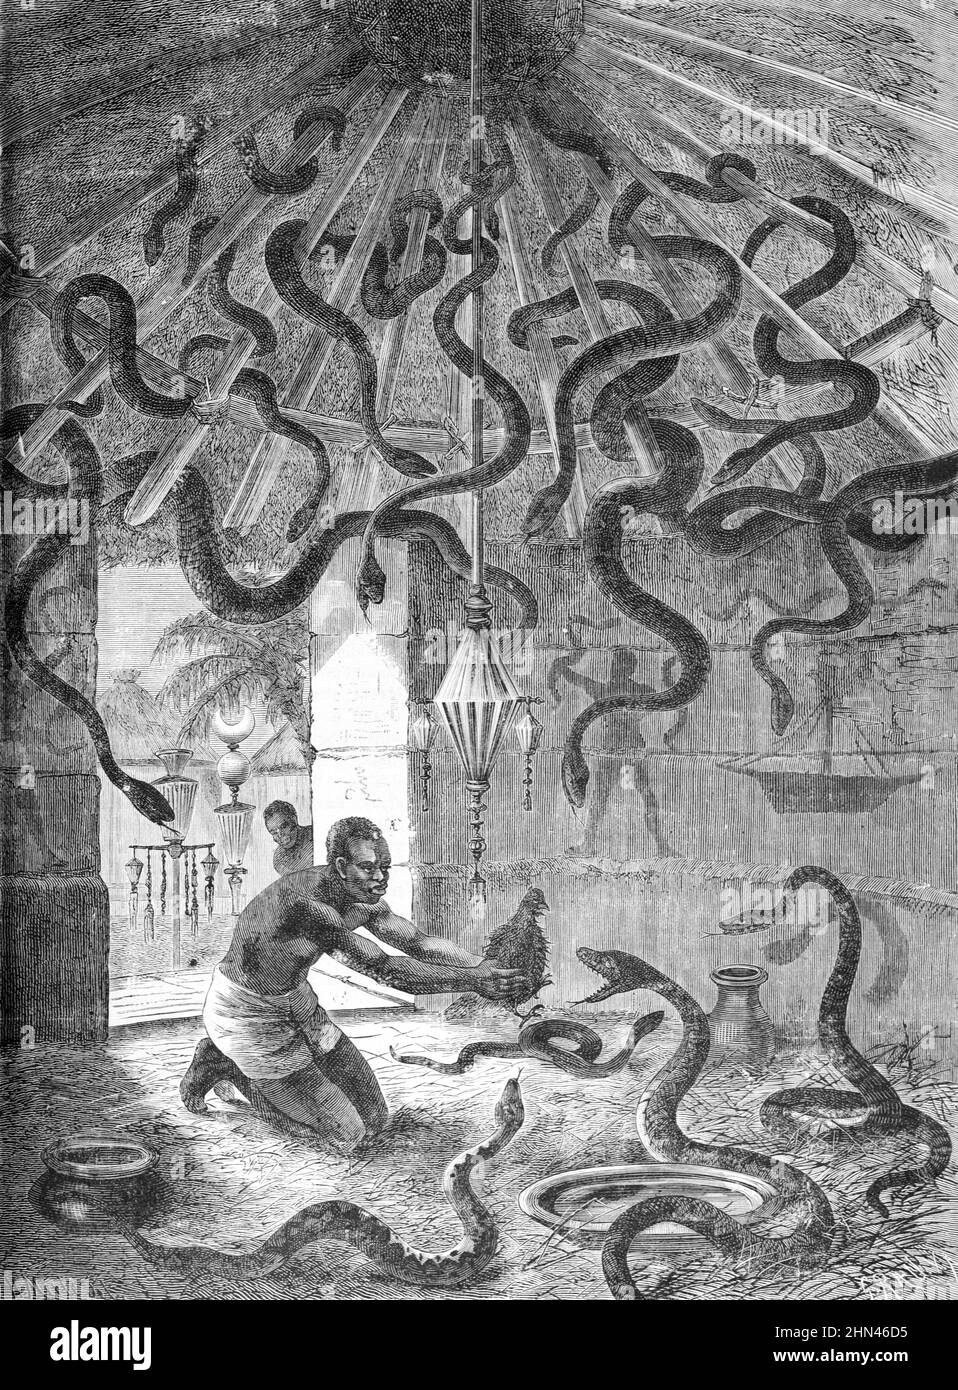 Snake Charmer, Witch Doctor or Sorcerer in the Snake Temple or Python Temple in Ouidah or Whydah Dahomey now Benin Africa. Ouidah is a Main Centre of West African Vodon or Voudou. Vintage Illustration or Engraving 1881 Stock Photo